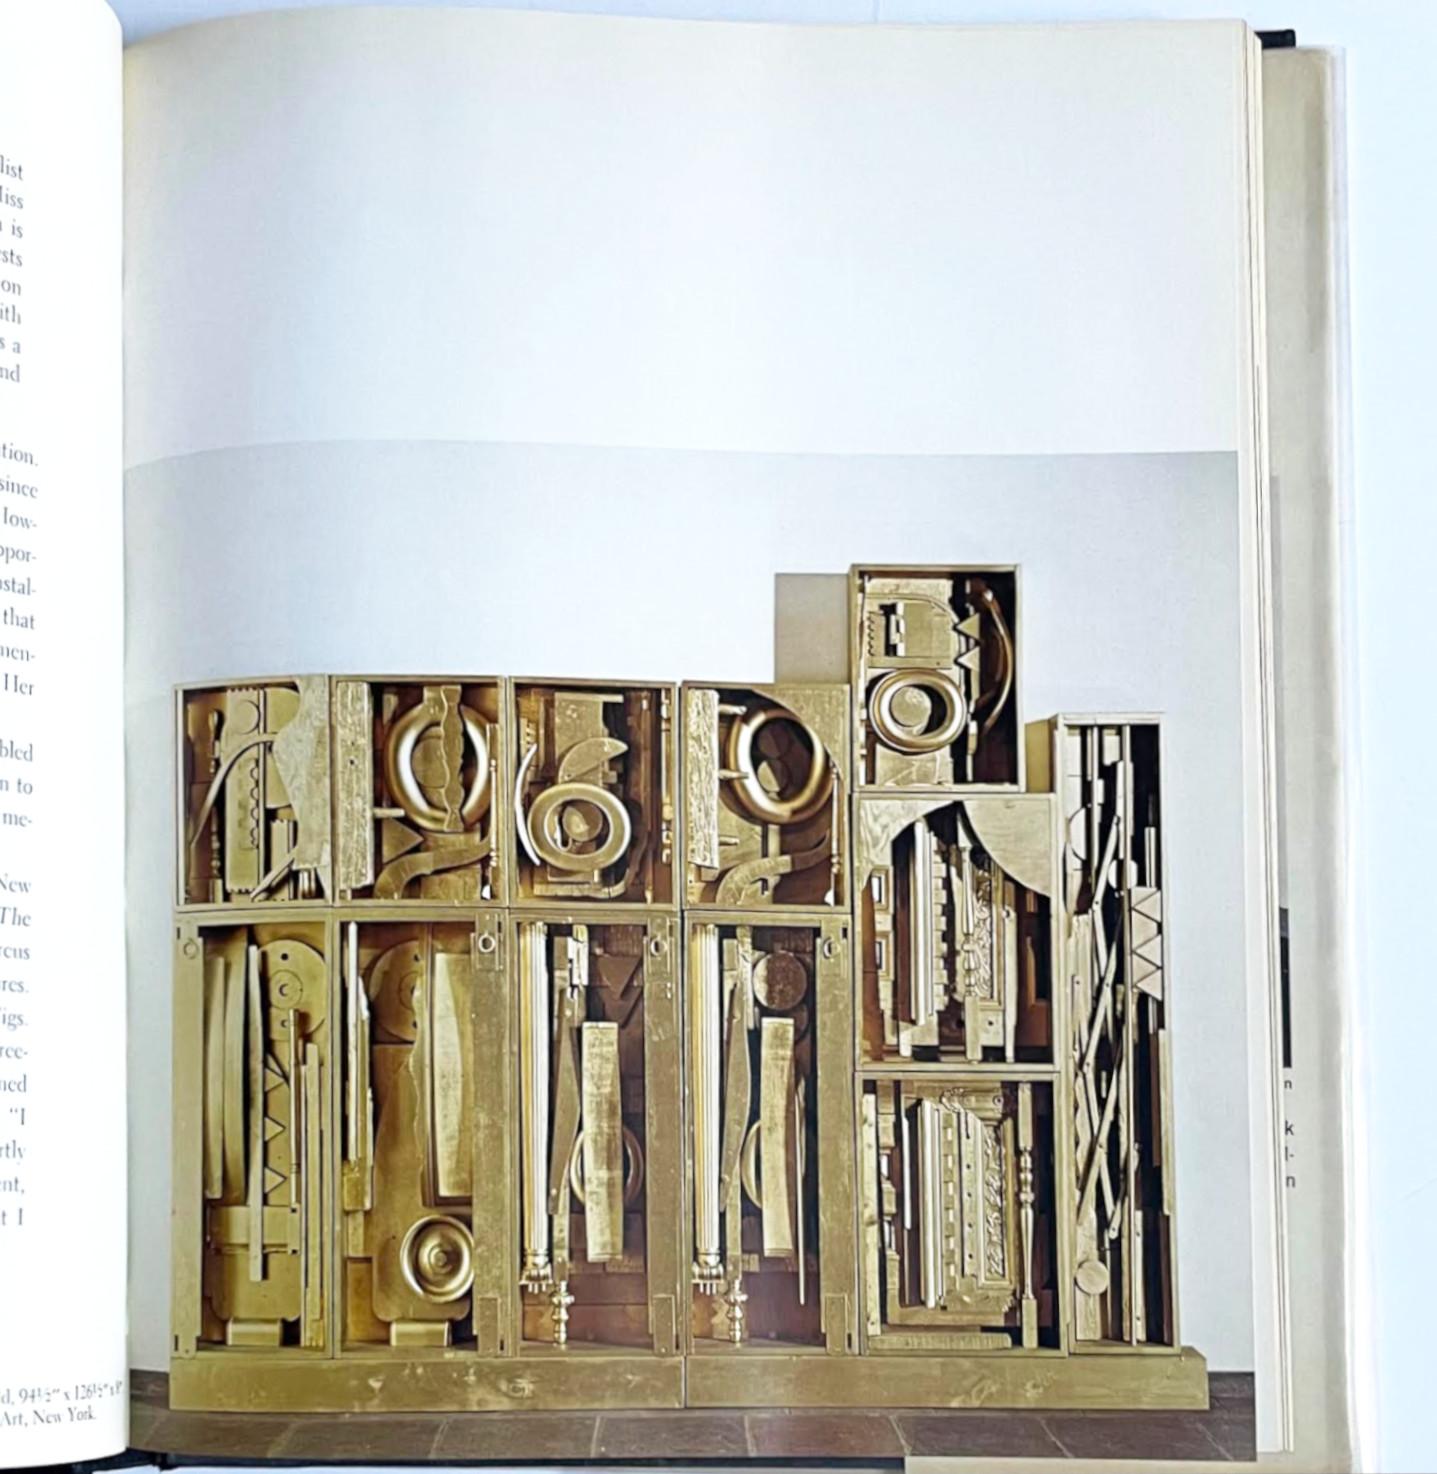 Louise Nevelson (Hand signed by BOTH Arne Glimcher and Louise Nevelson) 5